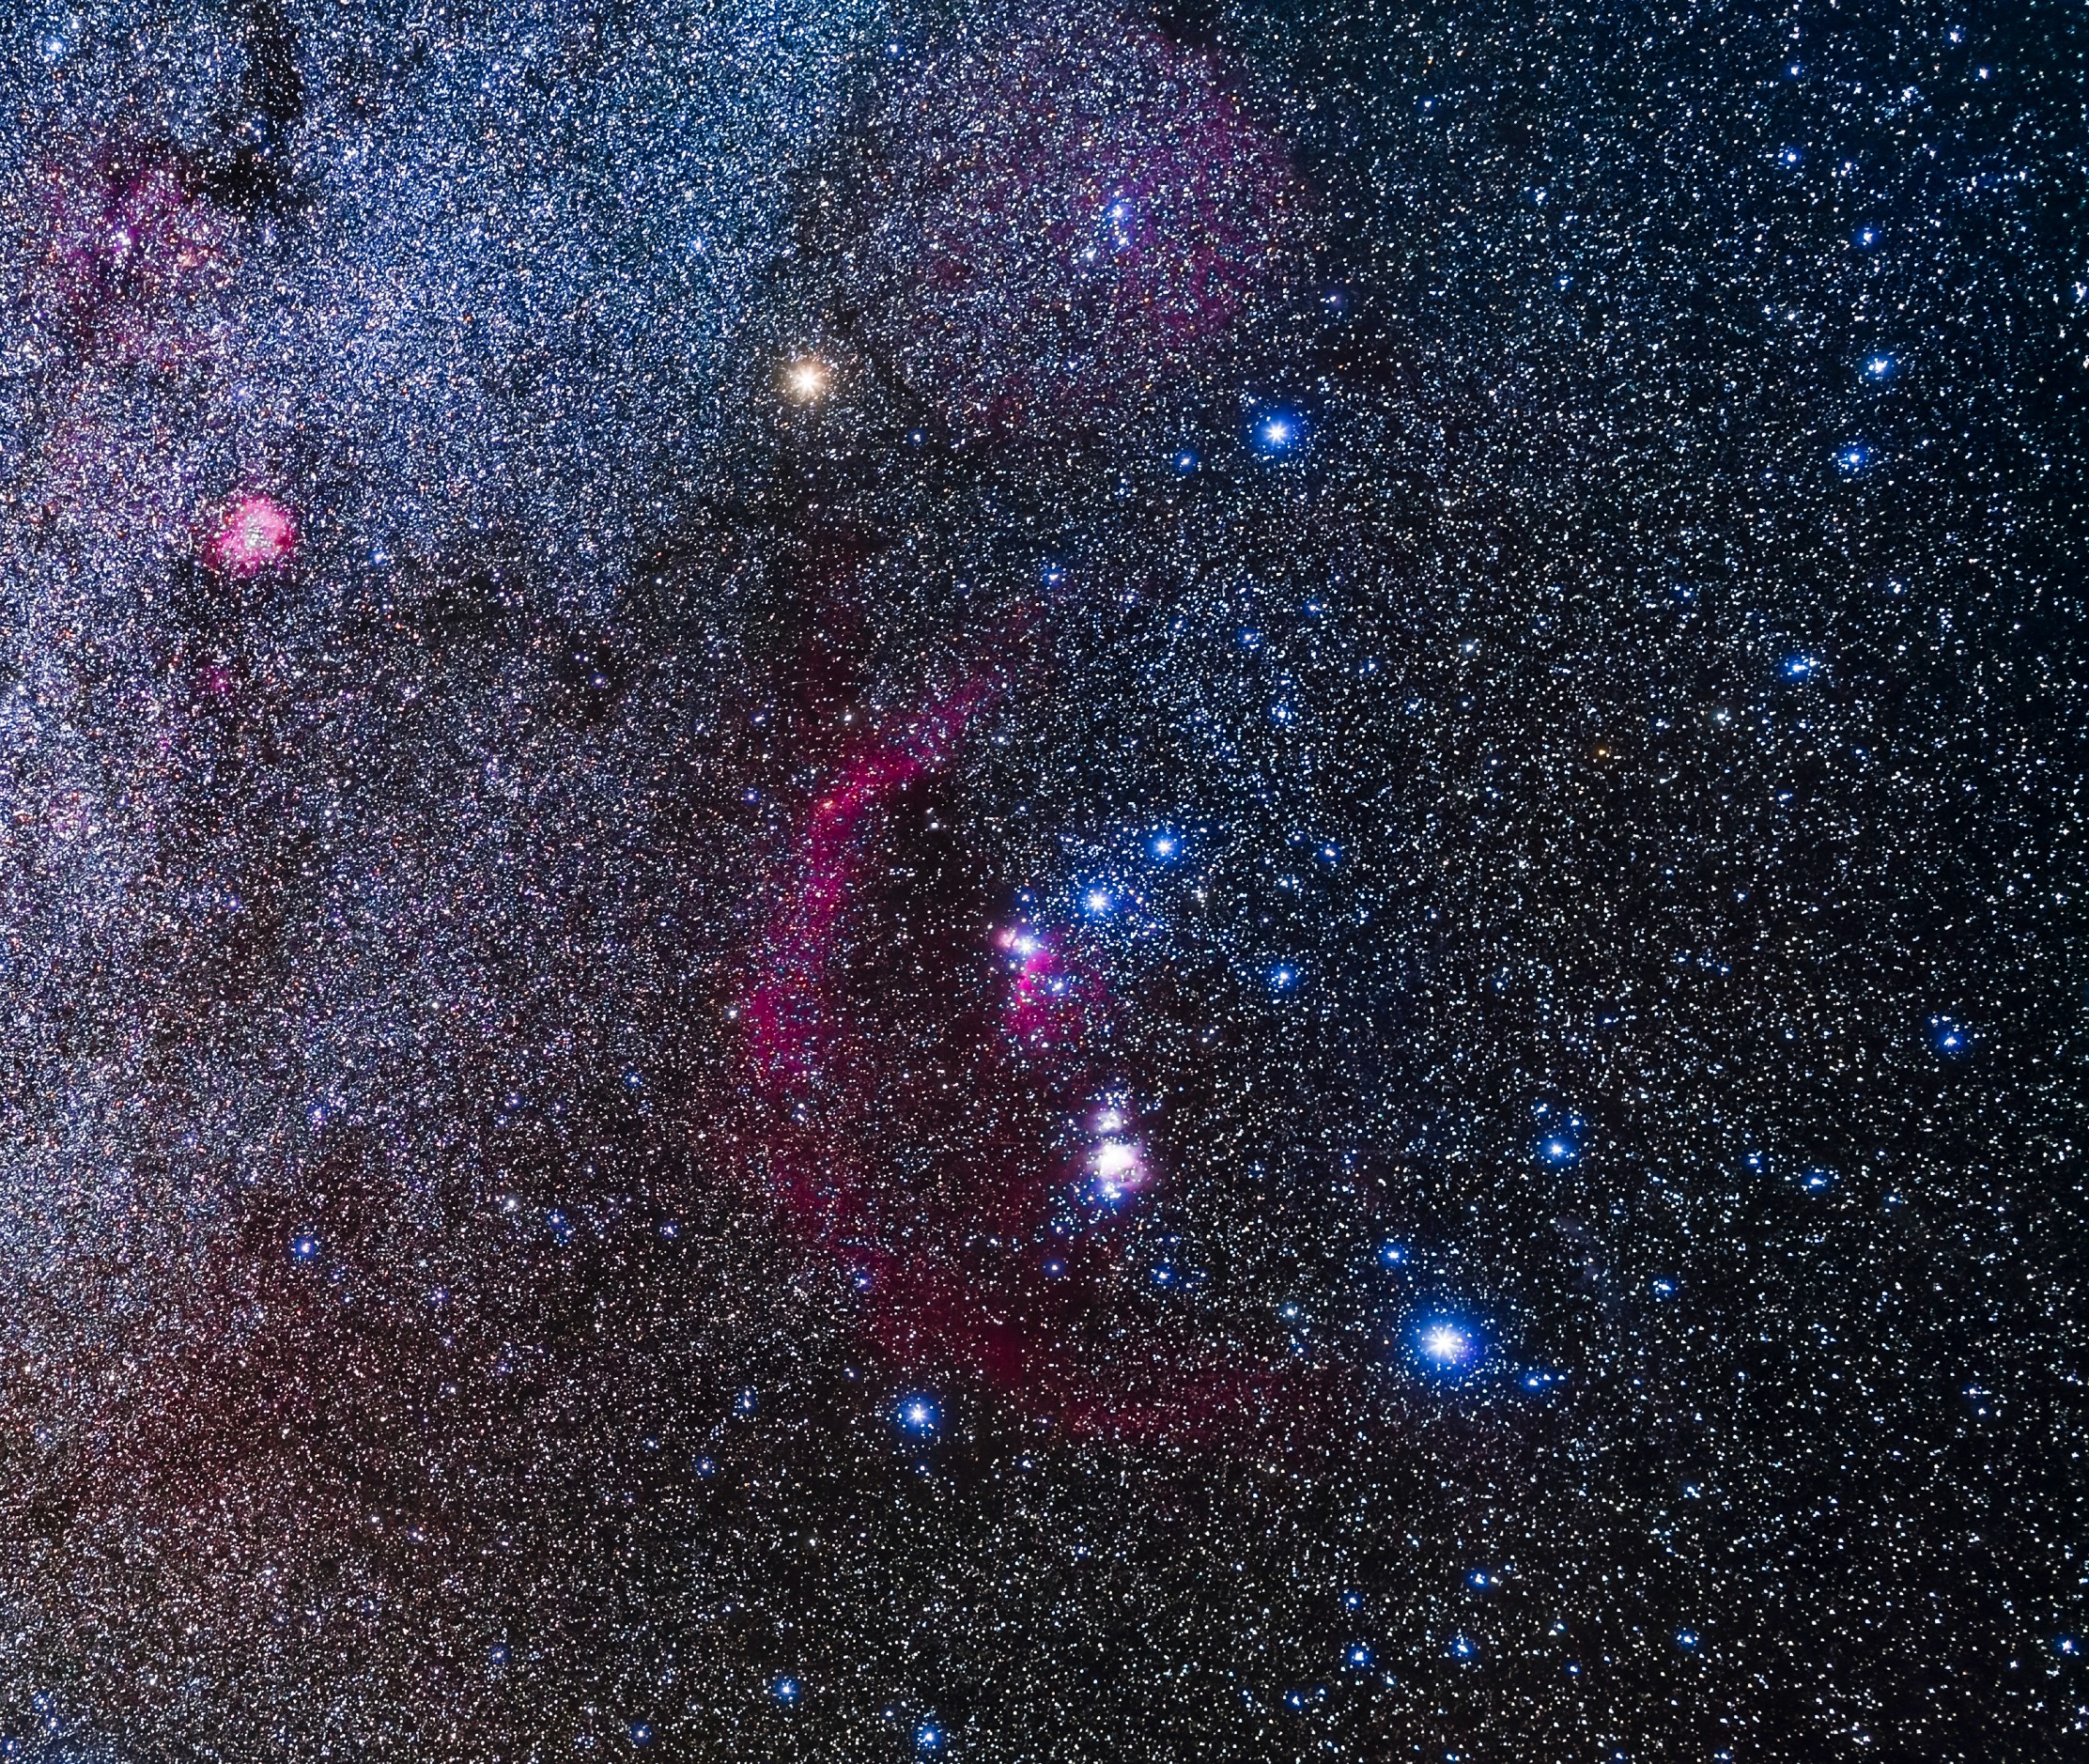 a photograph of the orion constellation and nebula in a star-filled sky